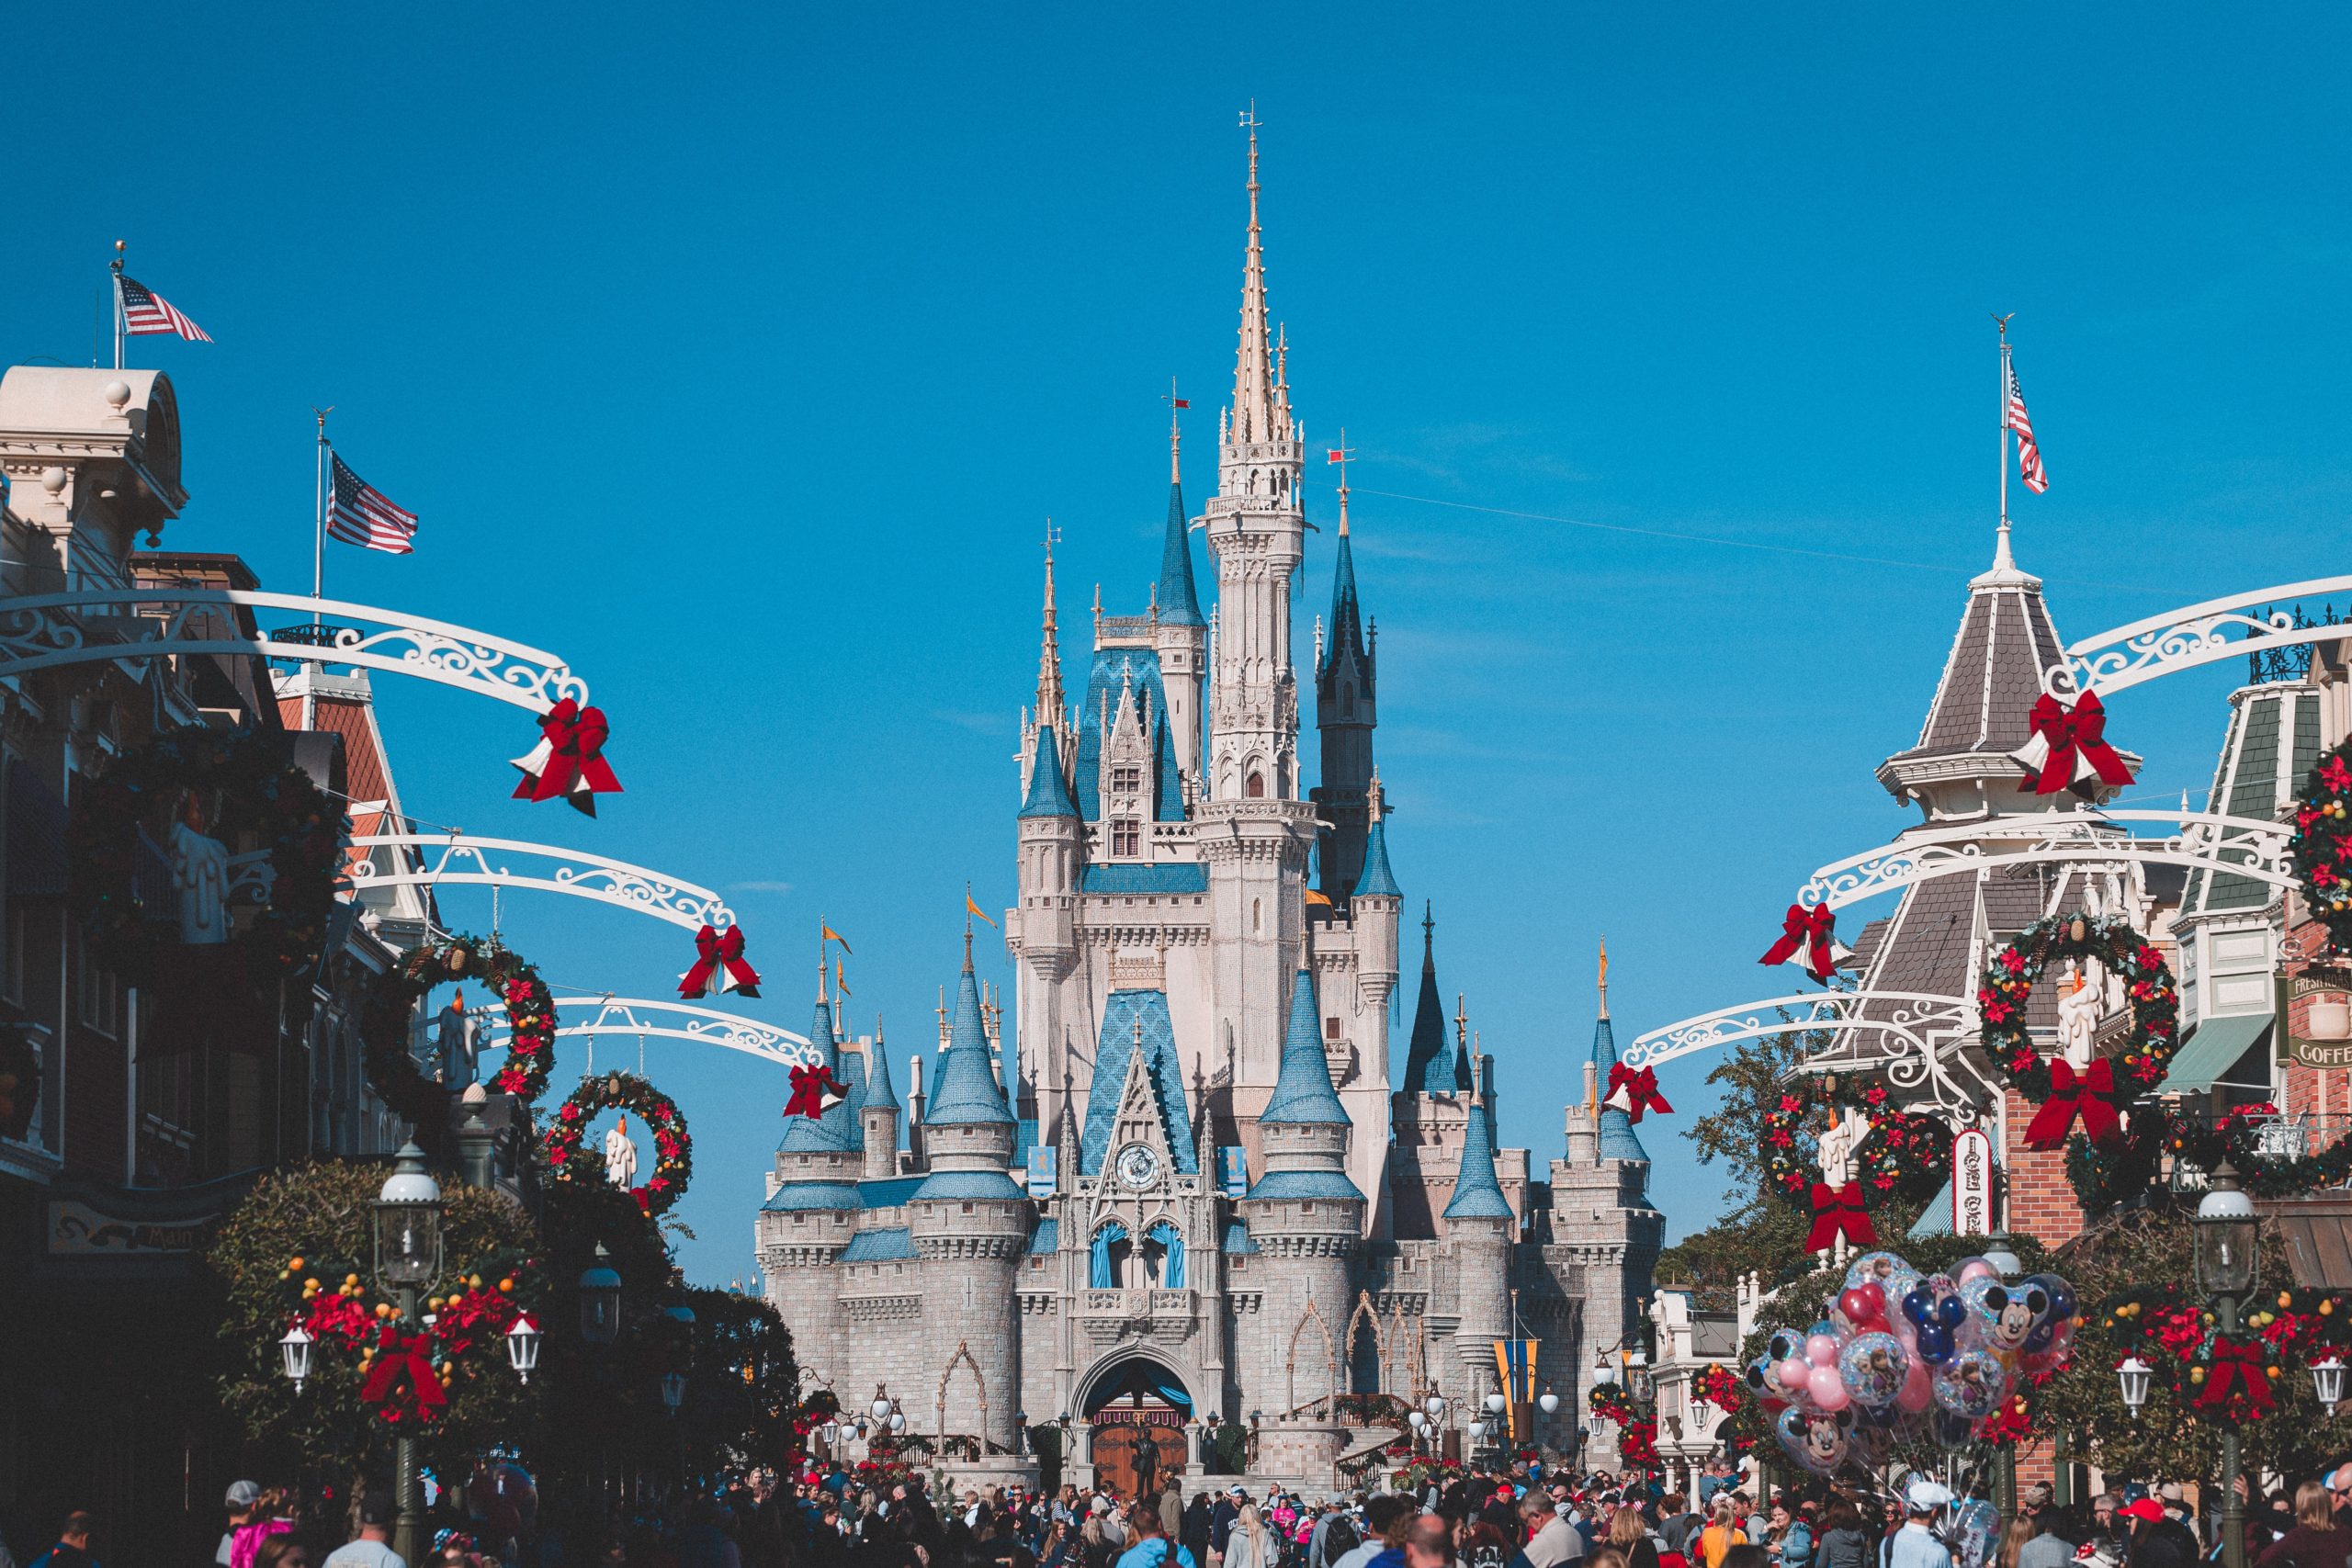 Two Major Events at Disney World Are Cancelled This Year